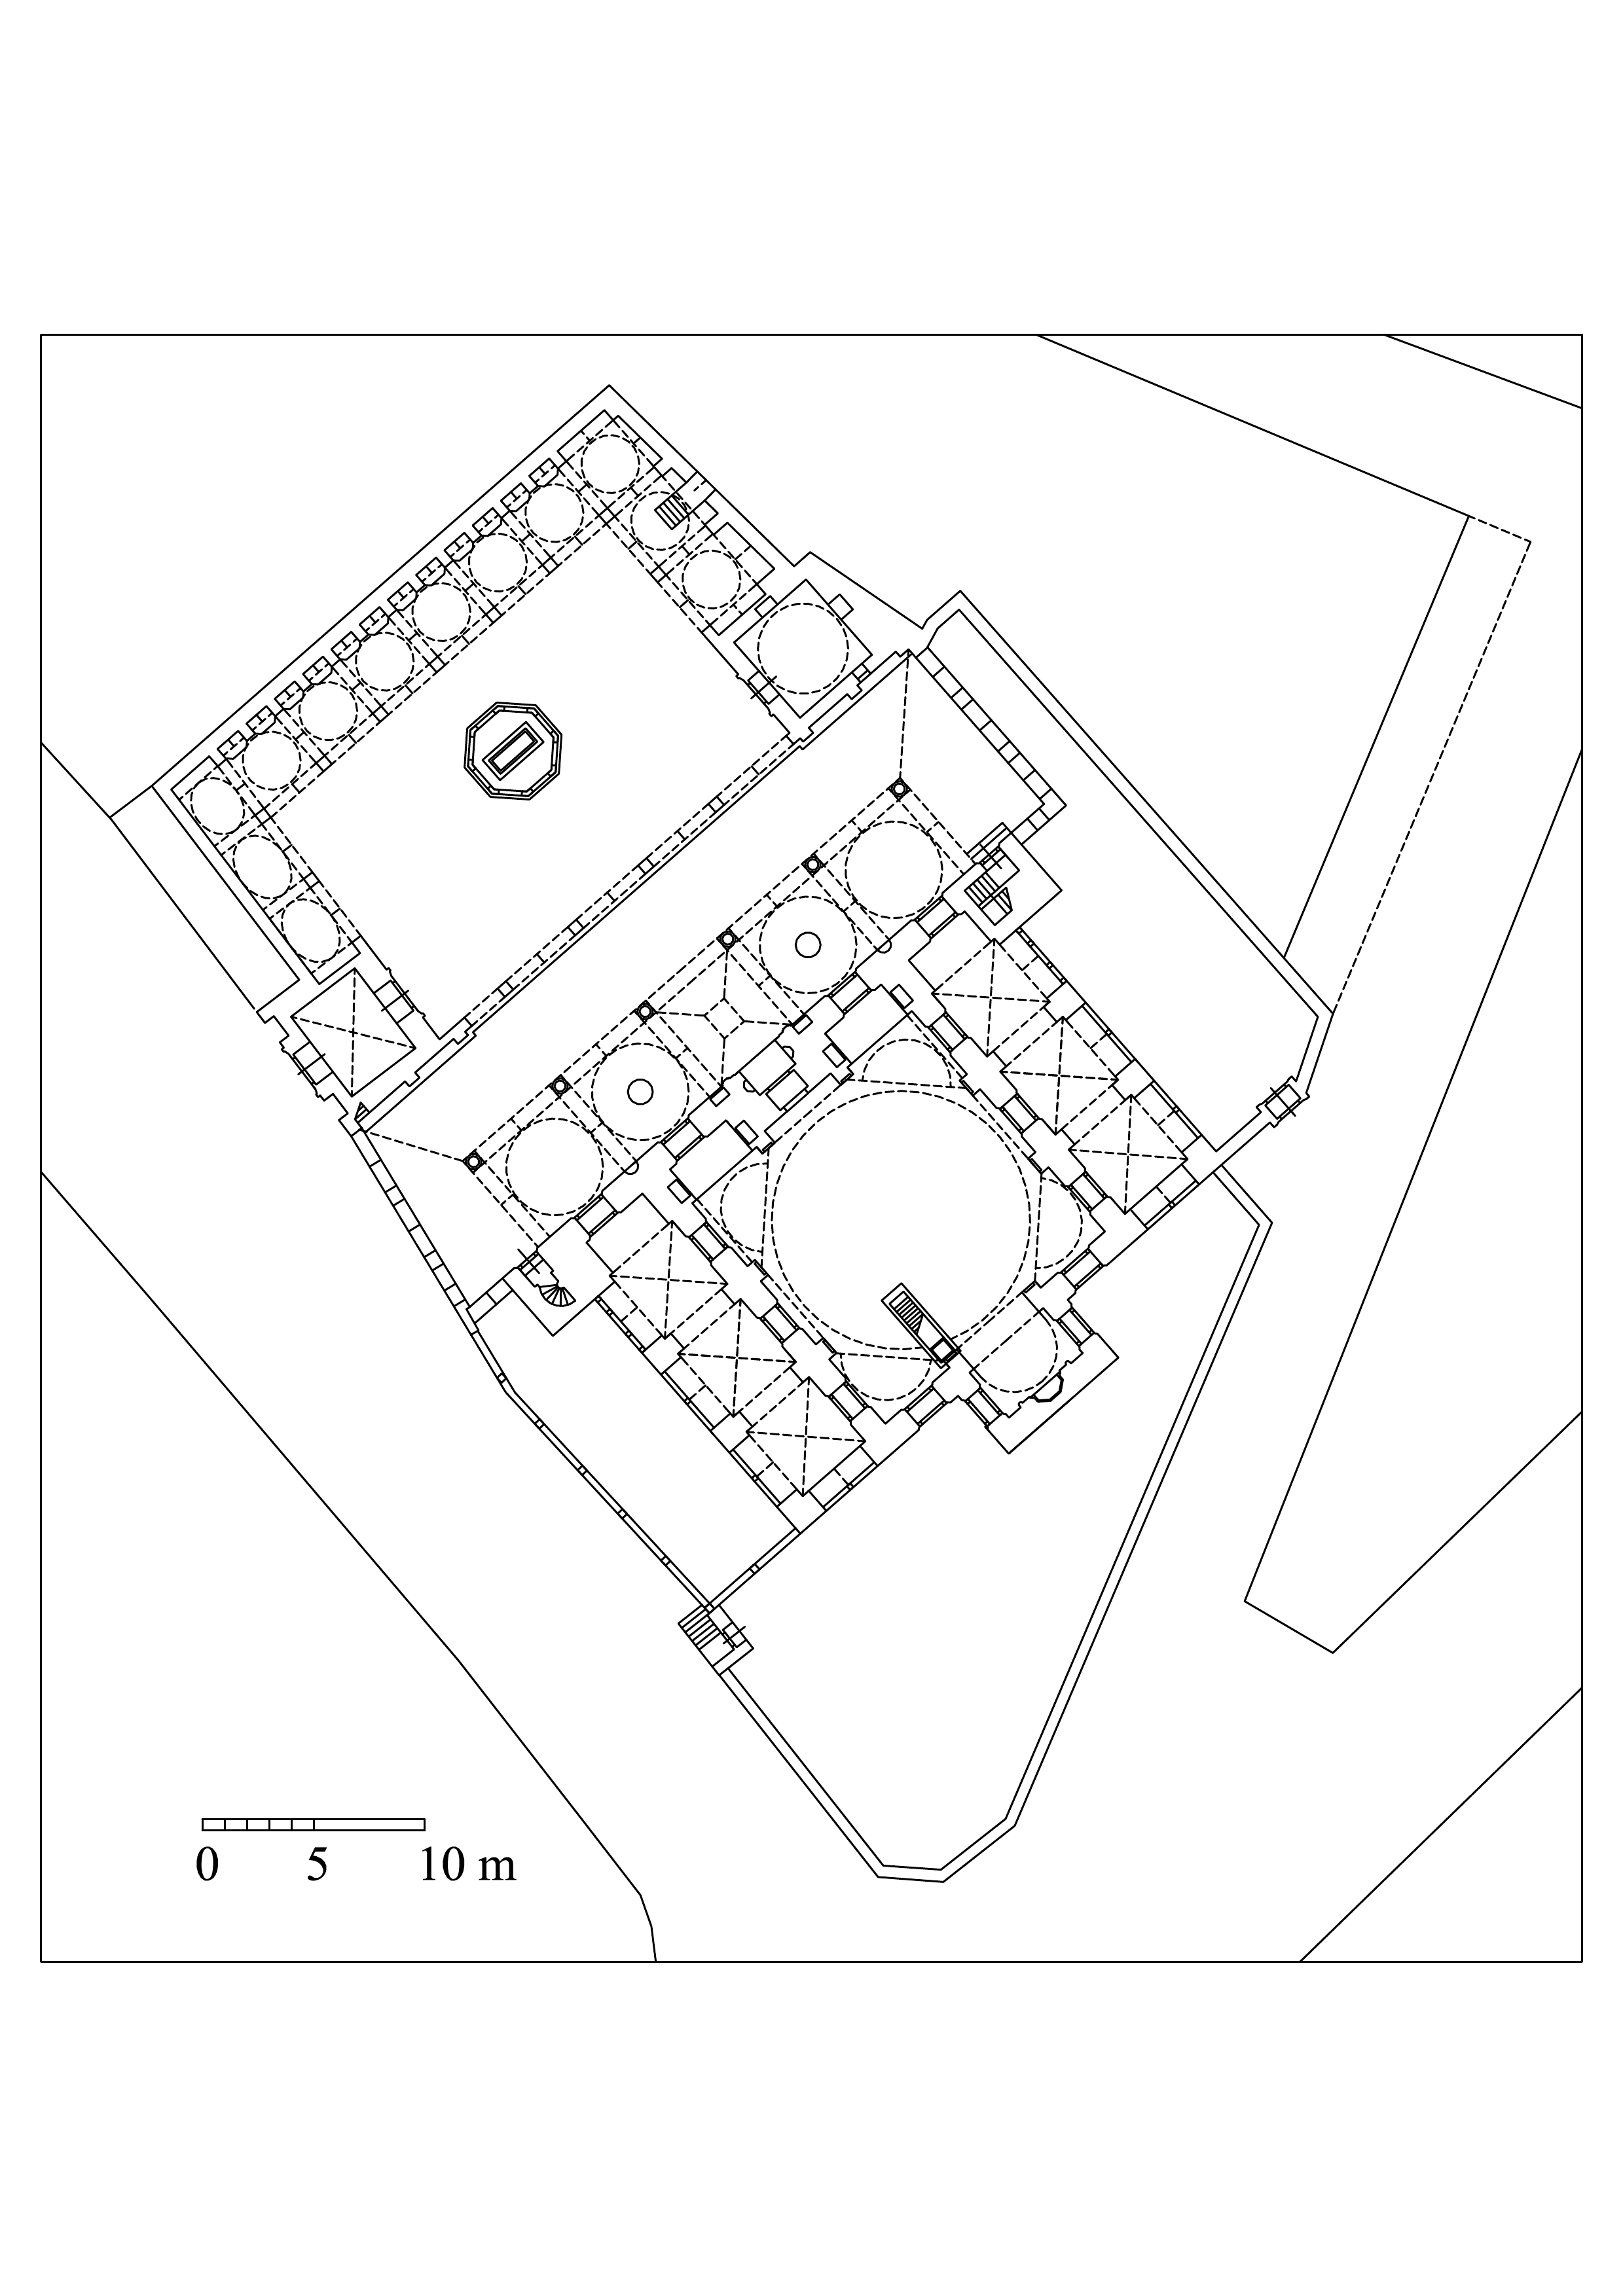 Mesih Mehmed Pasha Külliyesi - Floor plan of complex. DWG file in AutoCAD 2000 format. Click the download button to download a zipped file containing the .dwg file.